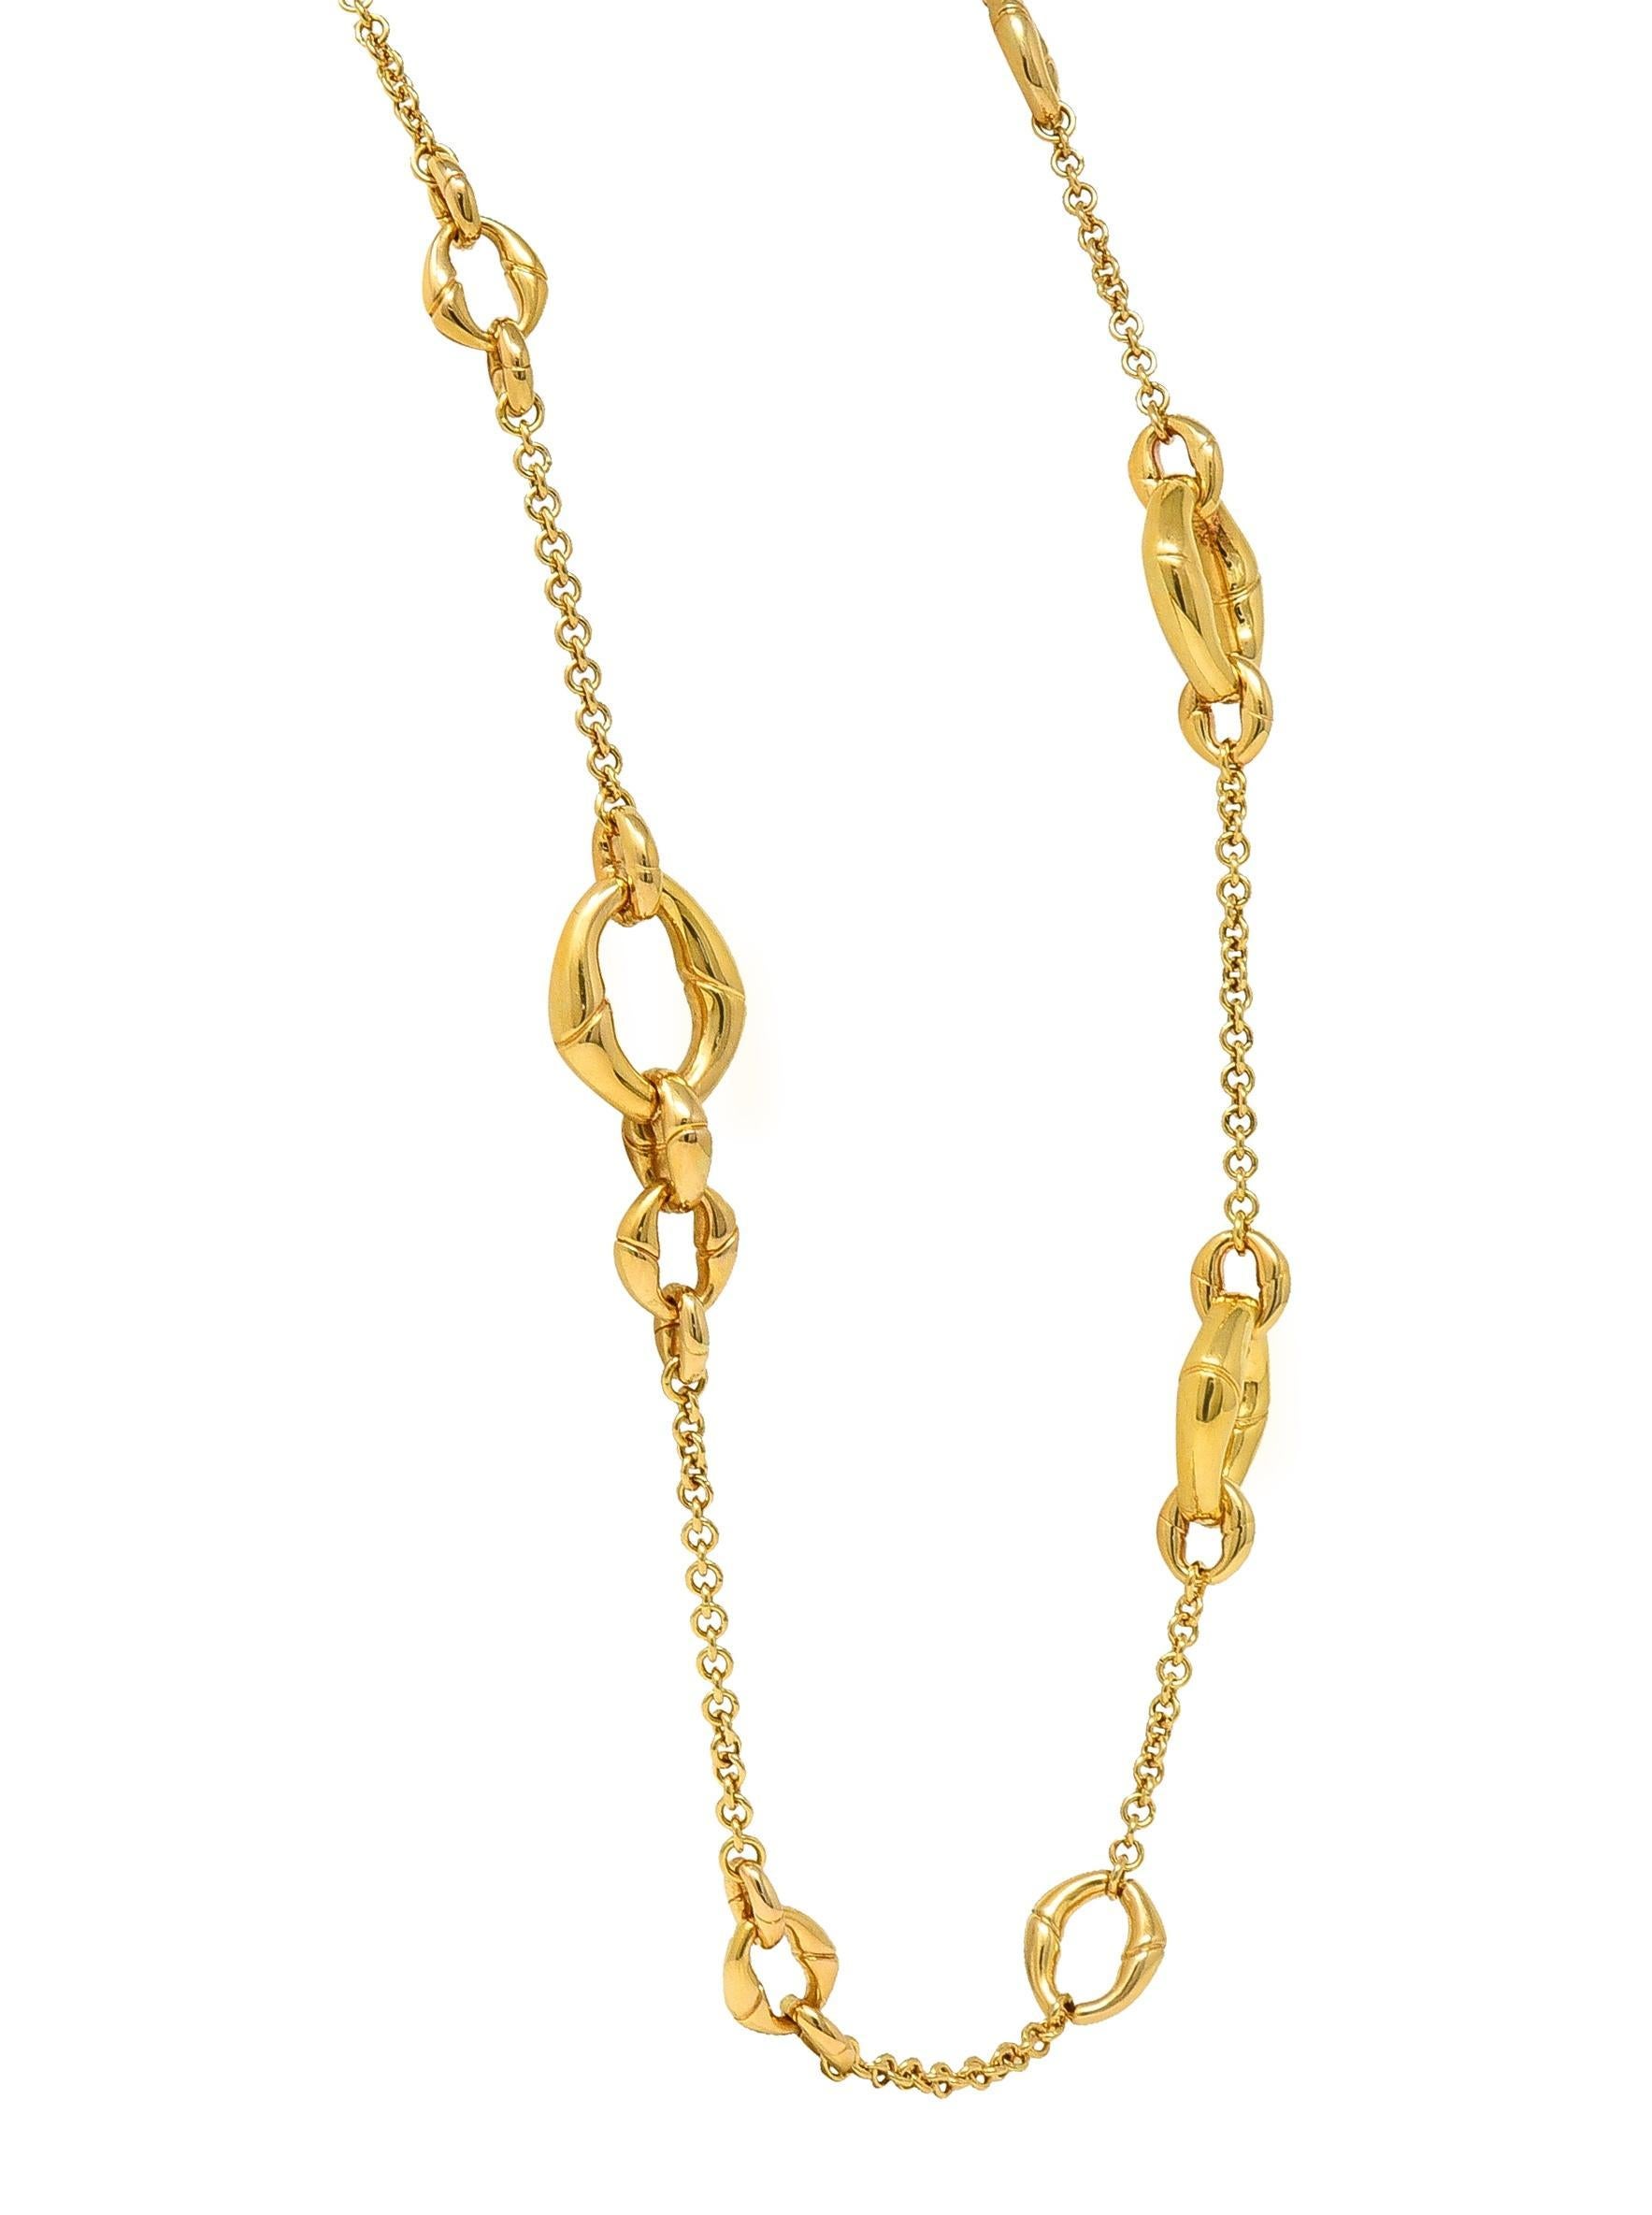 Gucci Contemporary 18 Karat Yellow Gold Bamboo Link Station Necklace For Sale 1